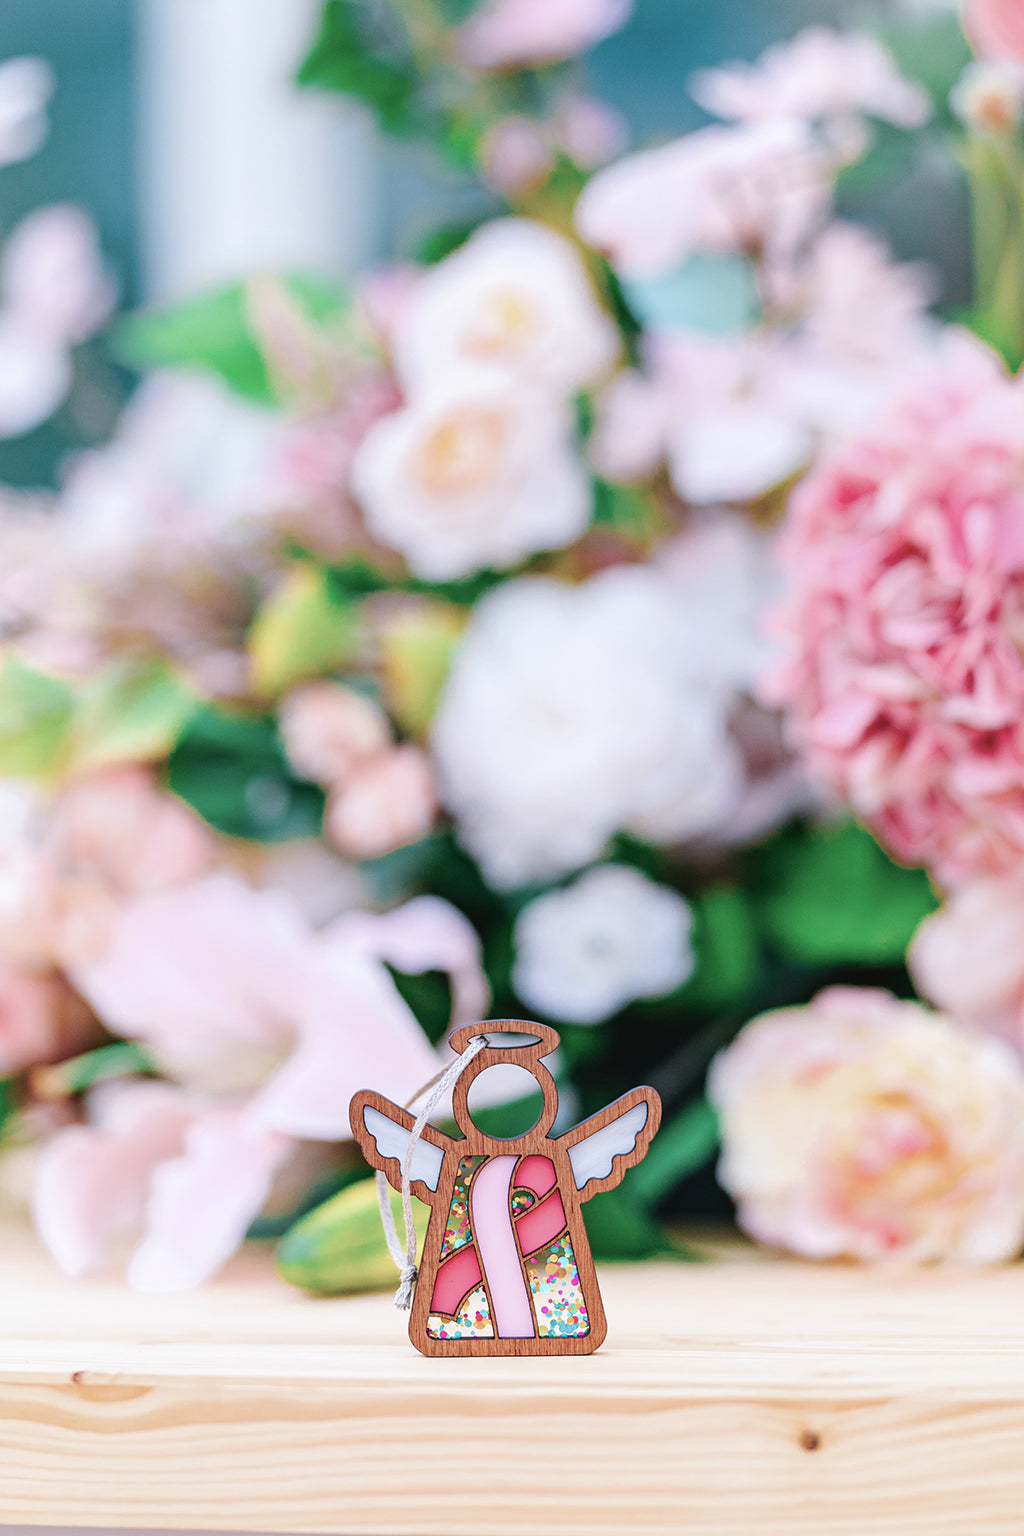 A wooden angel ornament with a pink ribbon stands before soft floral blooms, a gentle nod to breast cancer awareness.